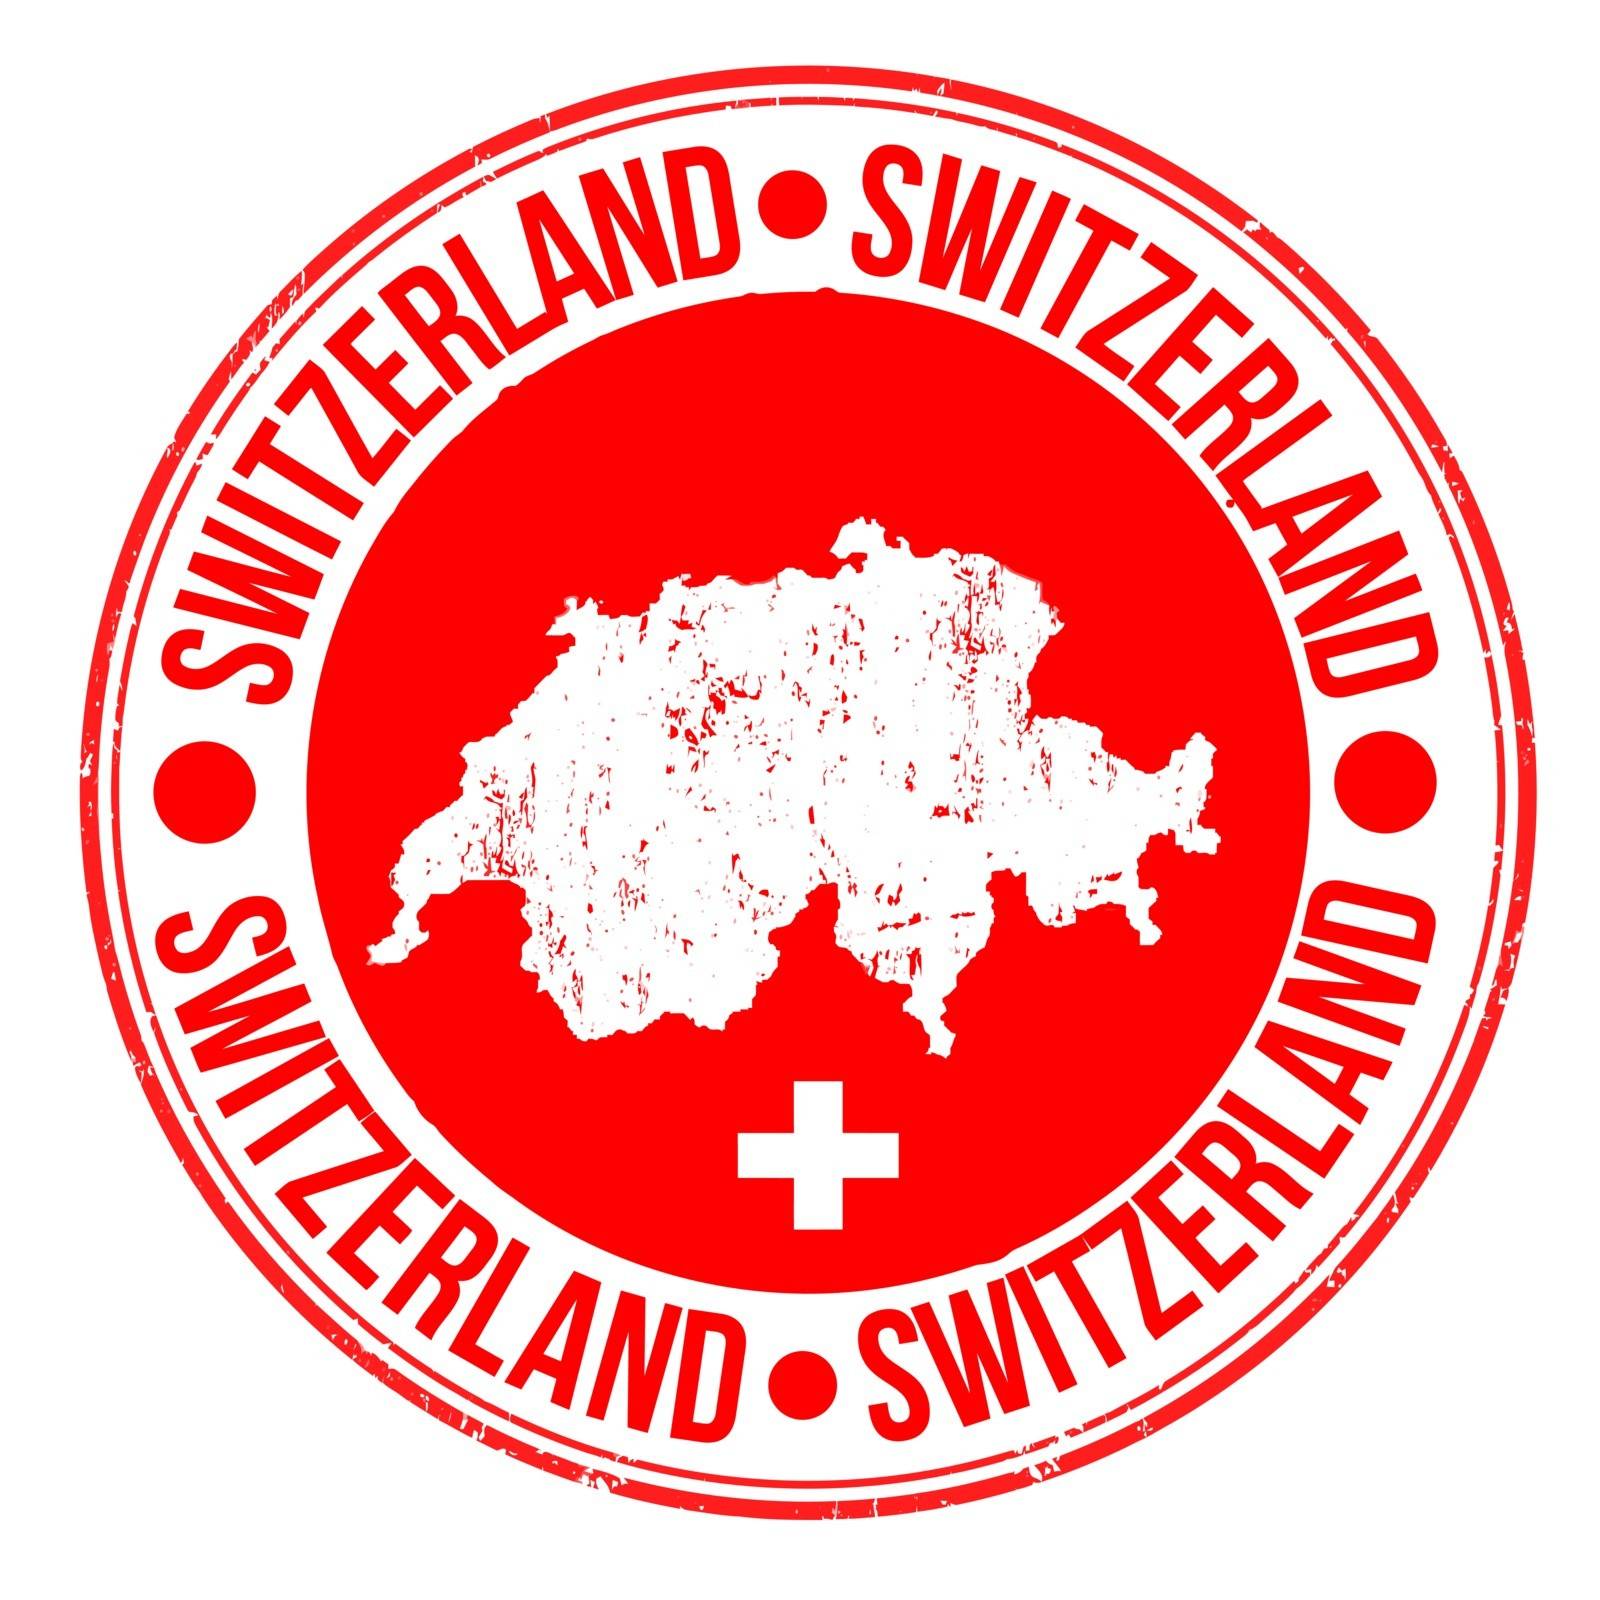 Grunge rubber stamp with map and the word Switzerland written inside, vector illustration